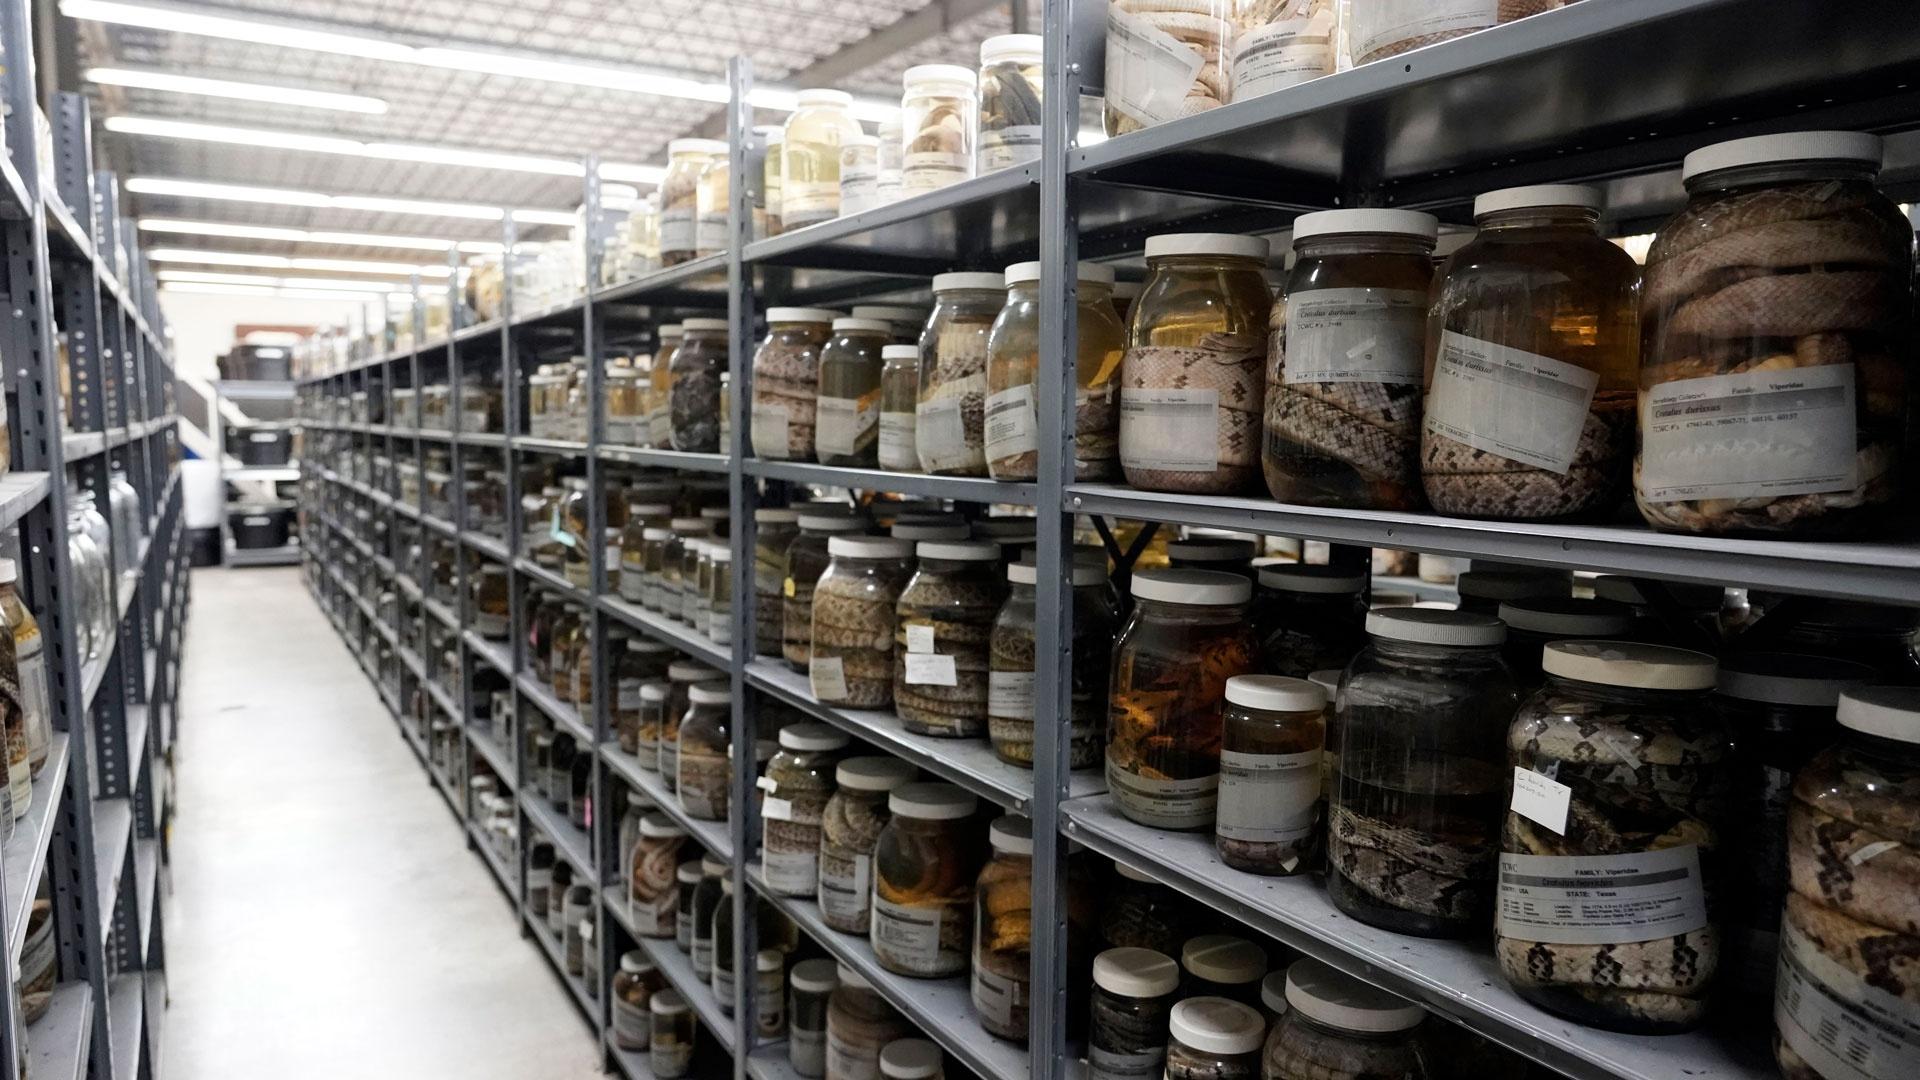 Just one of many shelves at the Biodiversity Research and Teaching Collections, as featured on Season 2 of "Texas A&M Today."